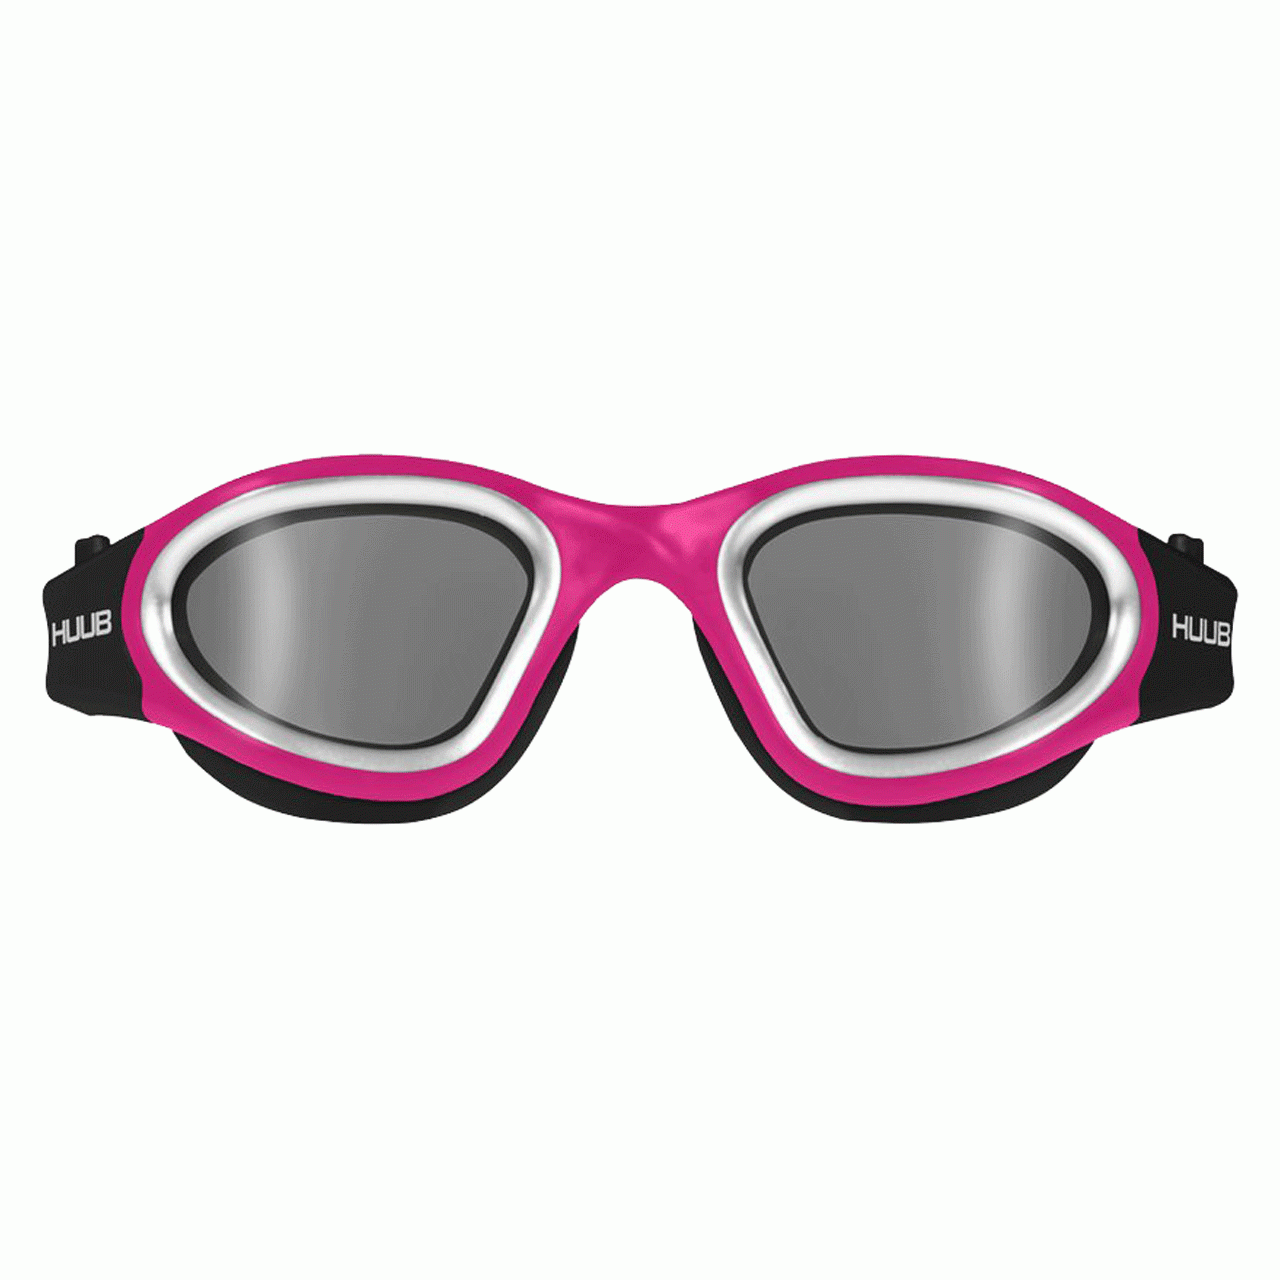 Schwimmbrille Aphotic Photochromic